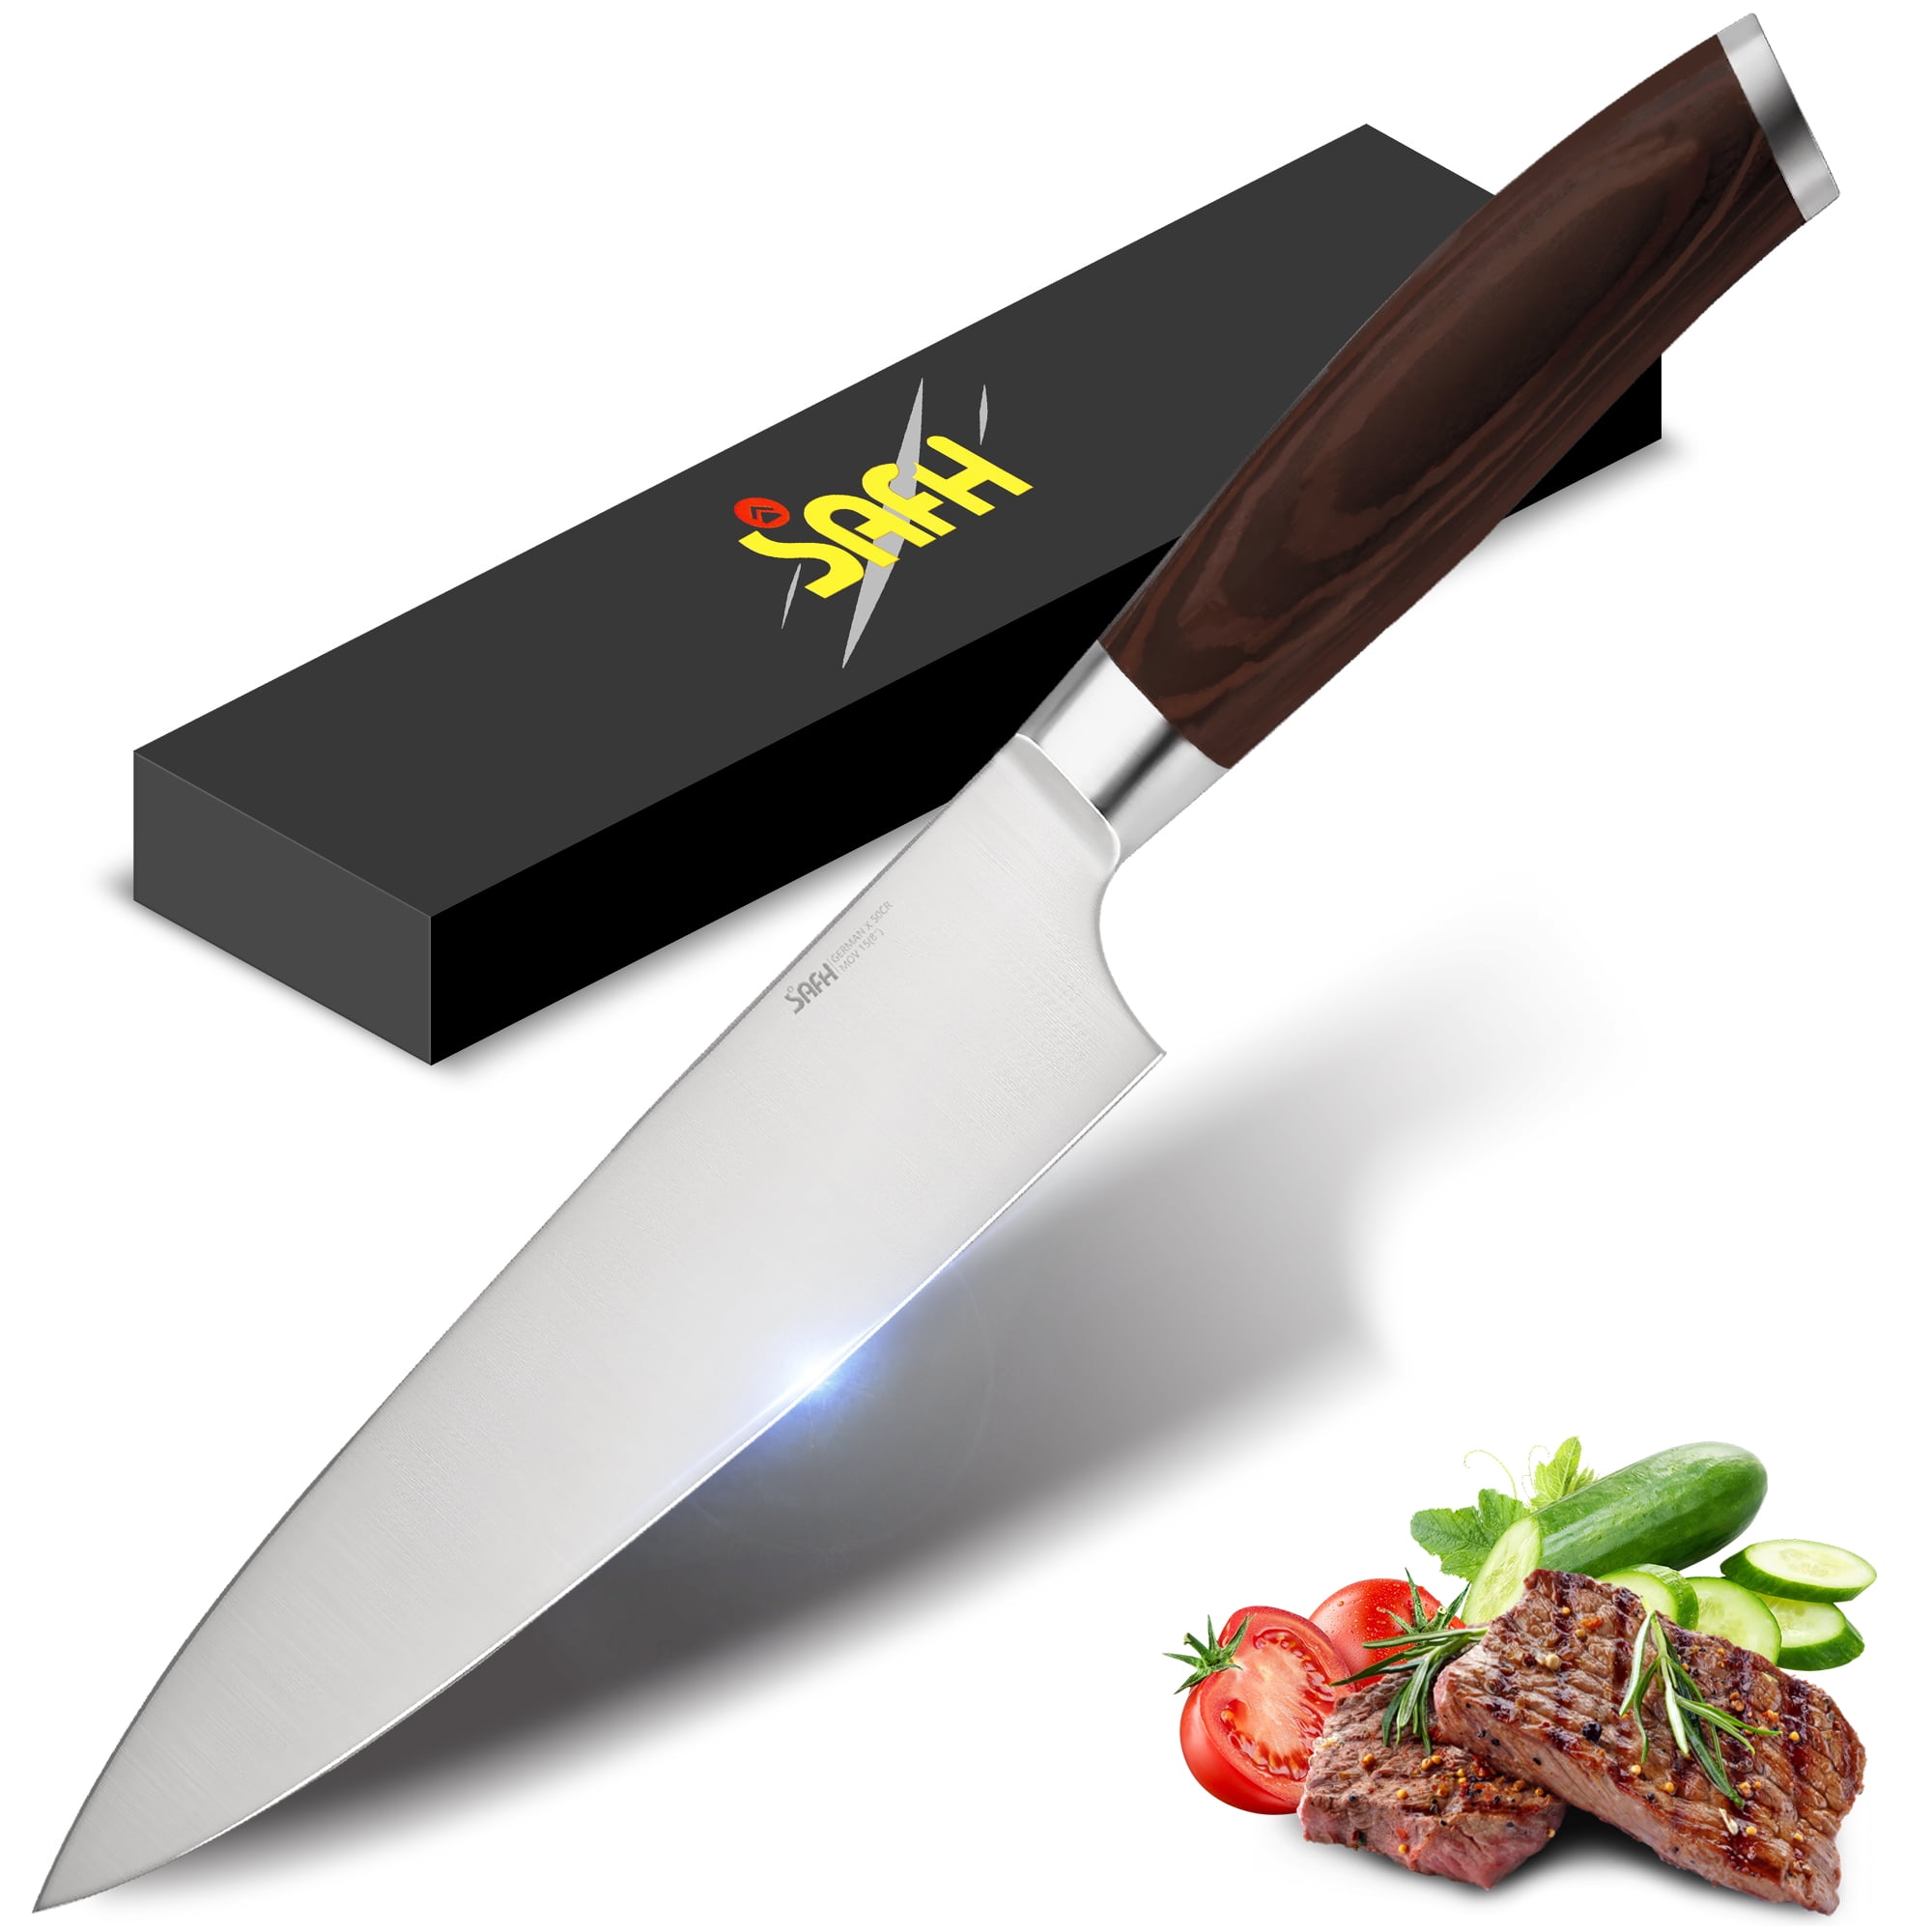 Leking Chef Knife German EN1.4116 High Carbon Stainless Steel 8 Inch  Professional Chef's Knife with Ergonomic Handle in Gift Box, Ultra Sharp  Kitchen